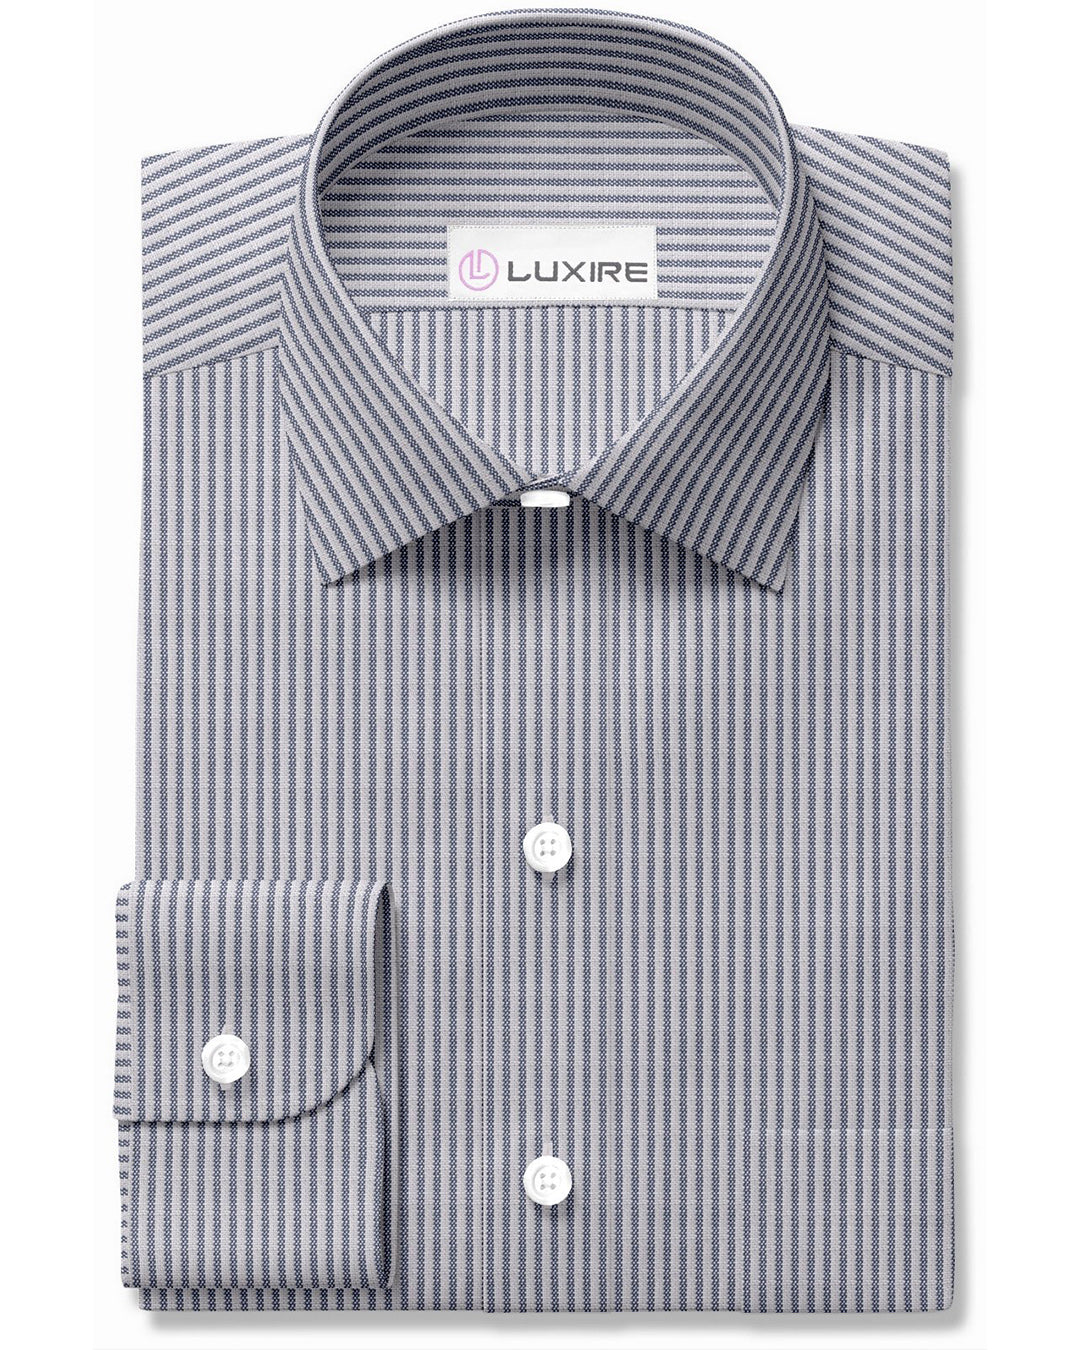 Front of the custom linen shirt for men in blue and white stripes by Luxire Clothing